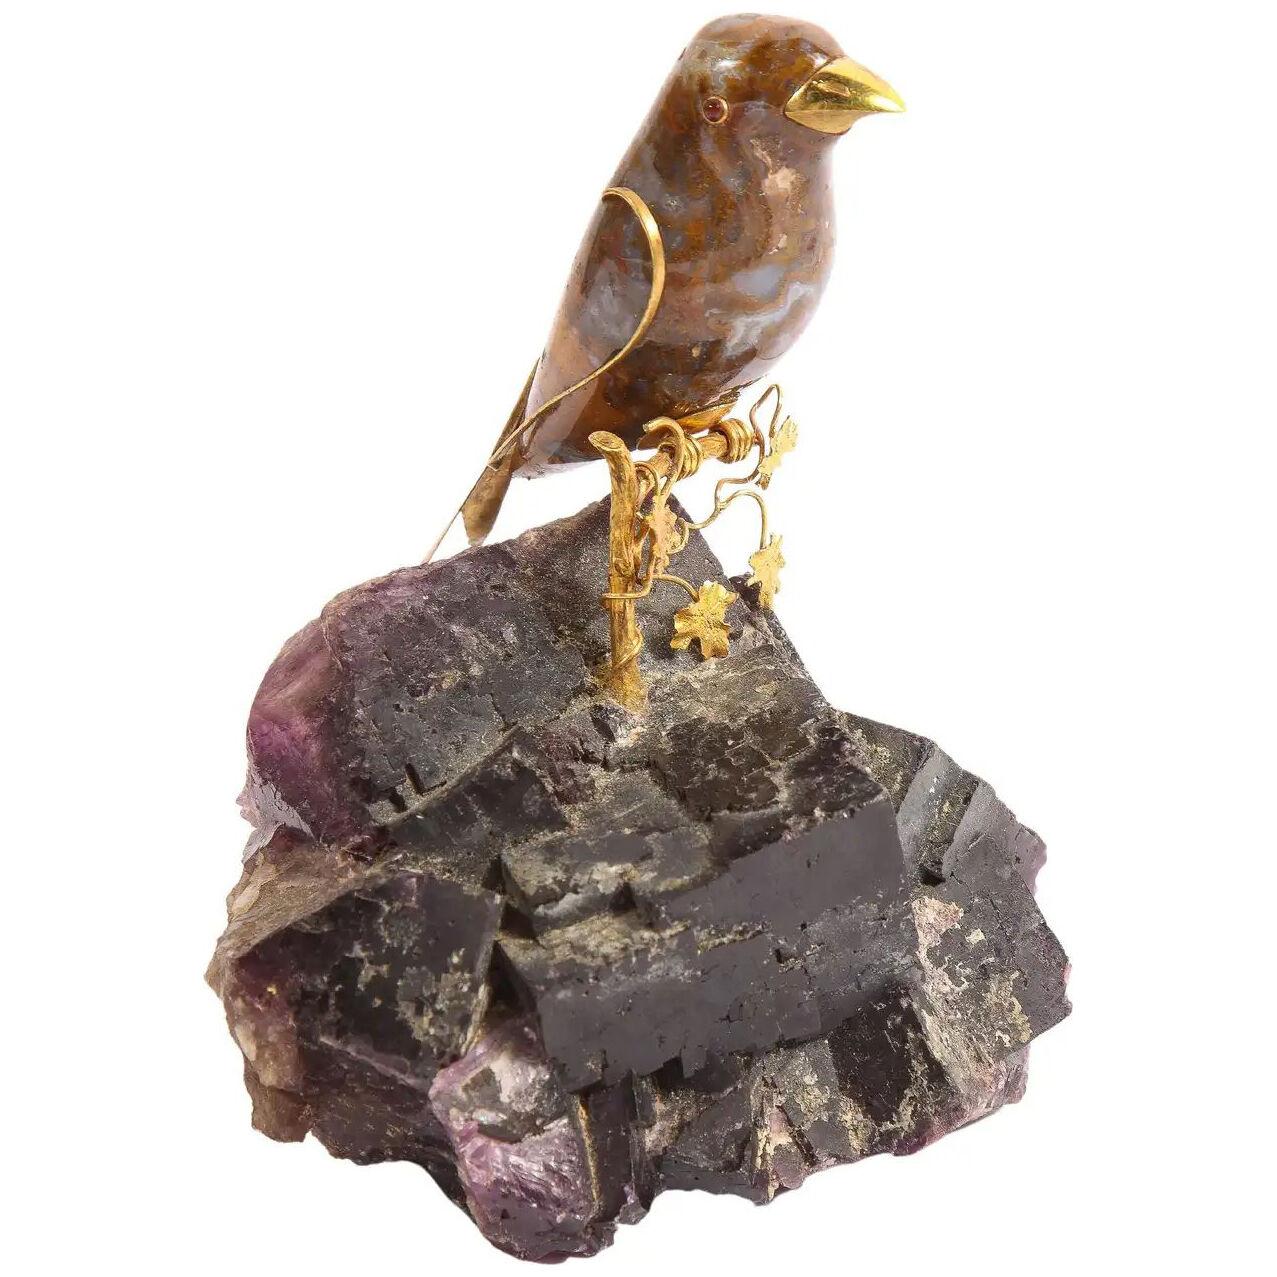 14k Gold Mounted Agate Bird on Carved Amethyst Rock